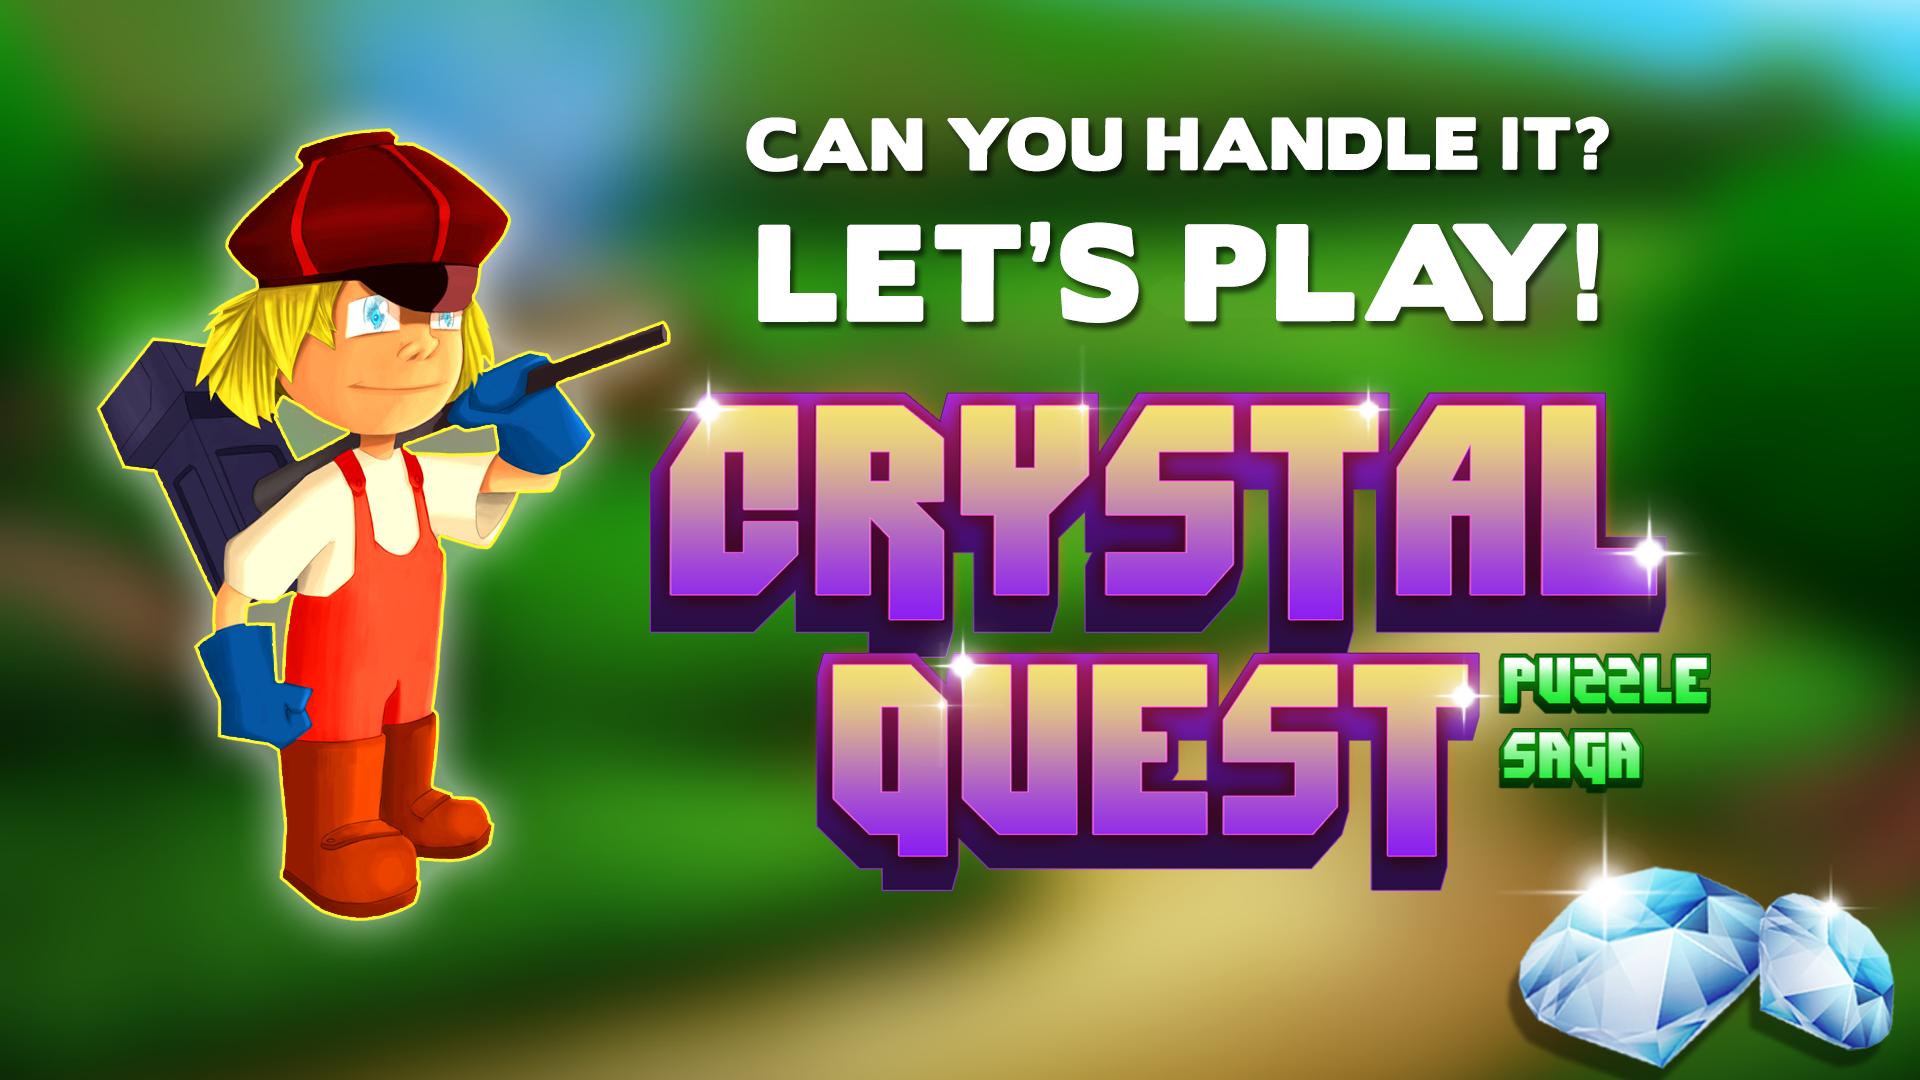 Crystal gets. Игра Кристаллы. Crystal Quest. Google Play Кристаллы. Игра Quests Crystal World.